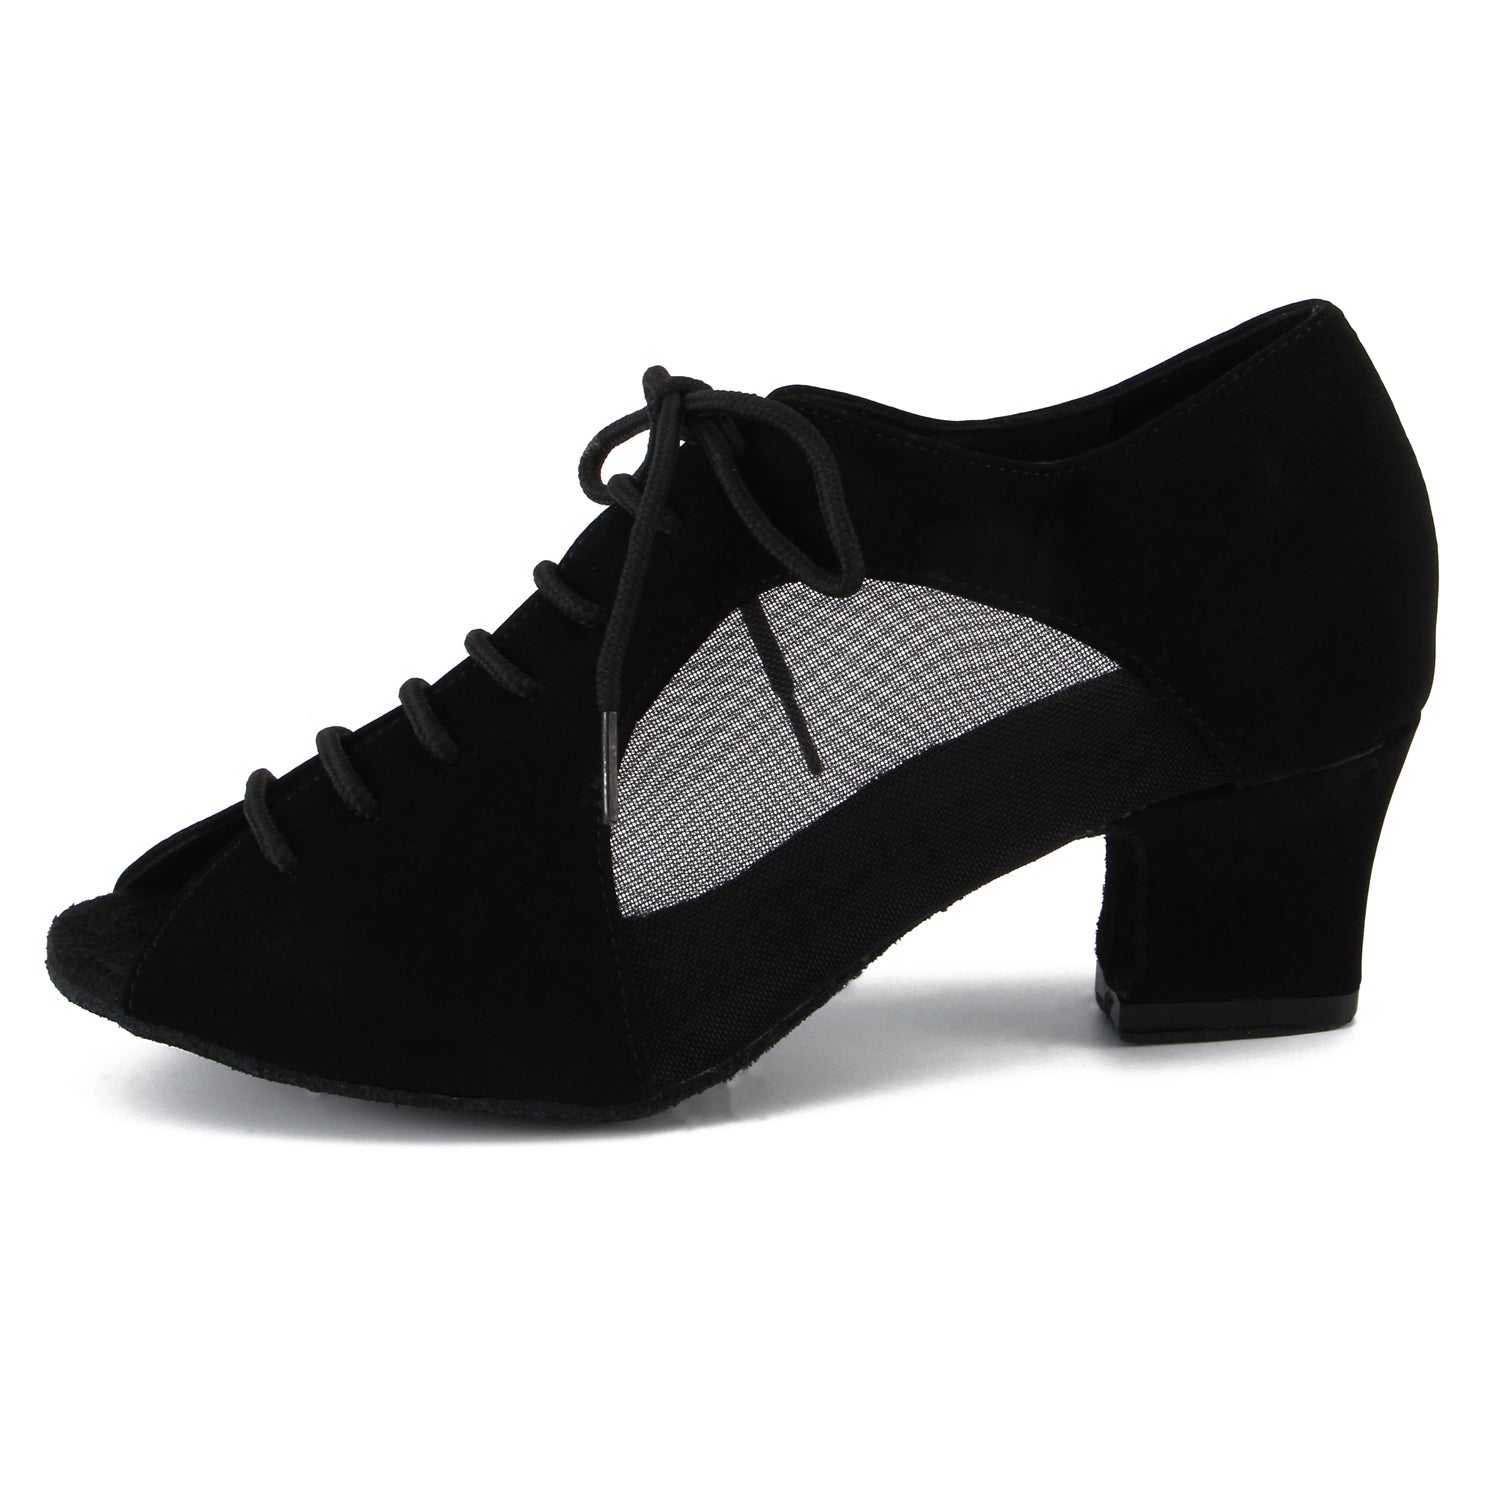 Women Ballroom Dancing Shoes with Suede Sole, Lace-up Open-toe Design in Black for Tango Latin Practice (PD-3003A)7